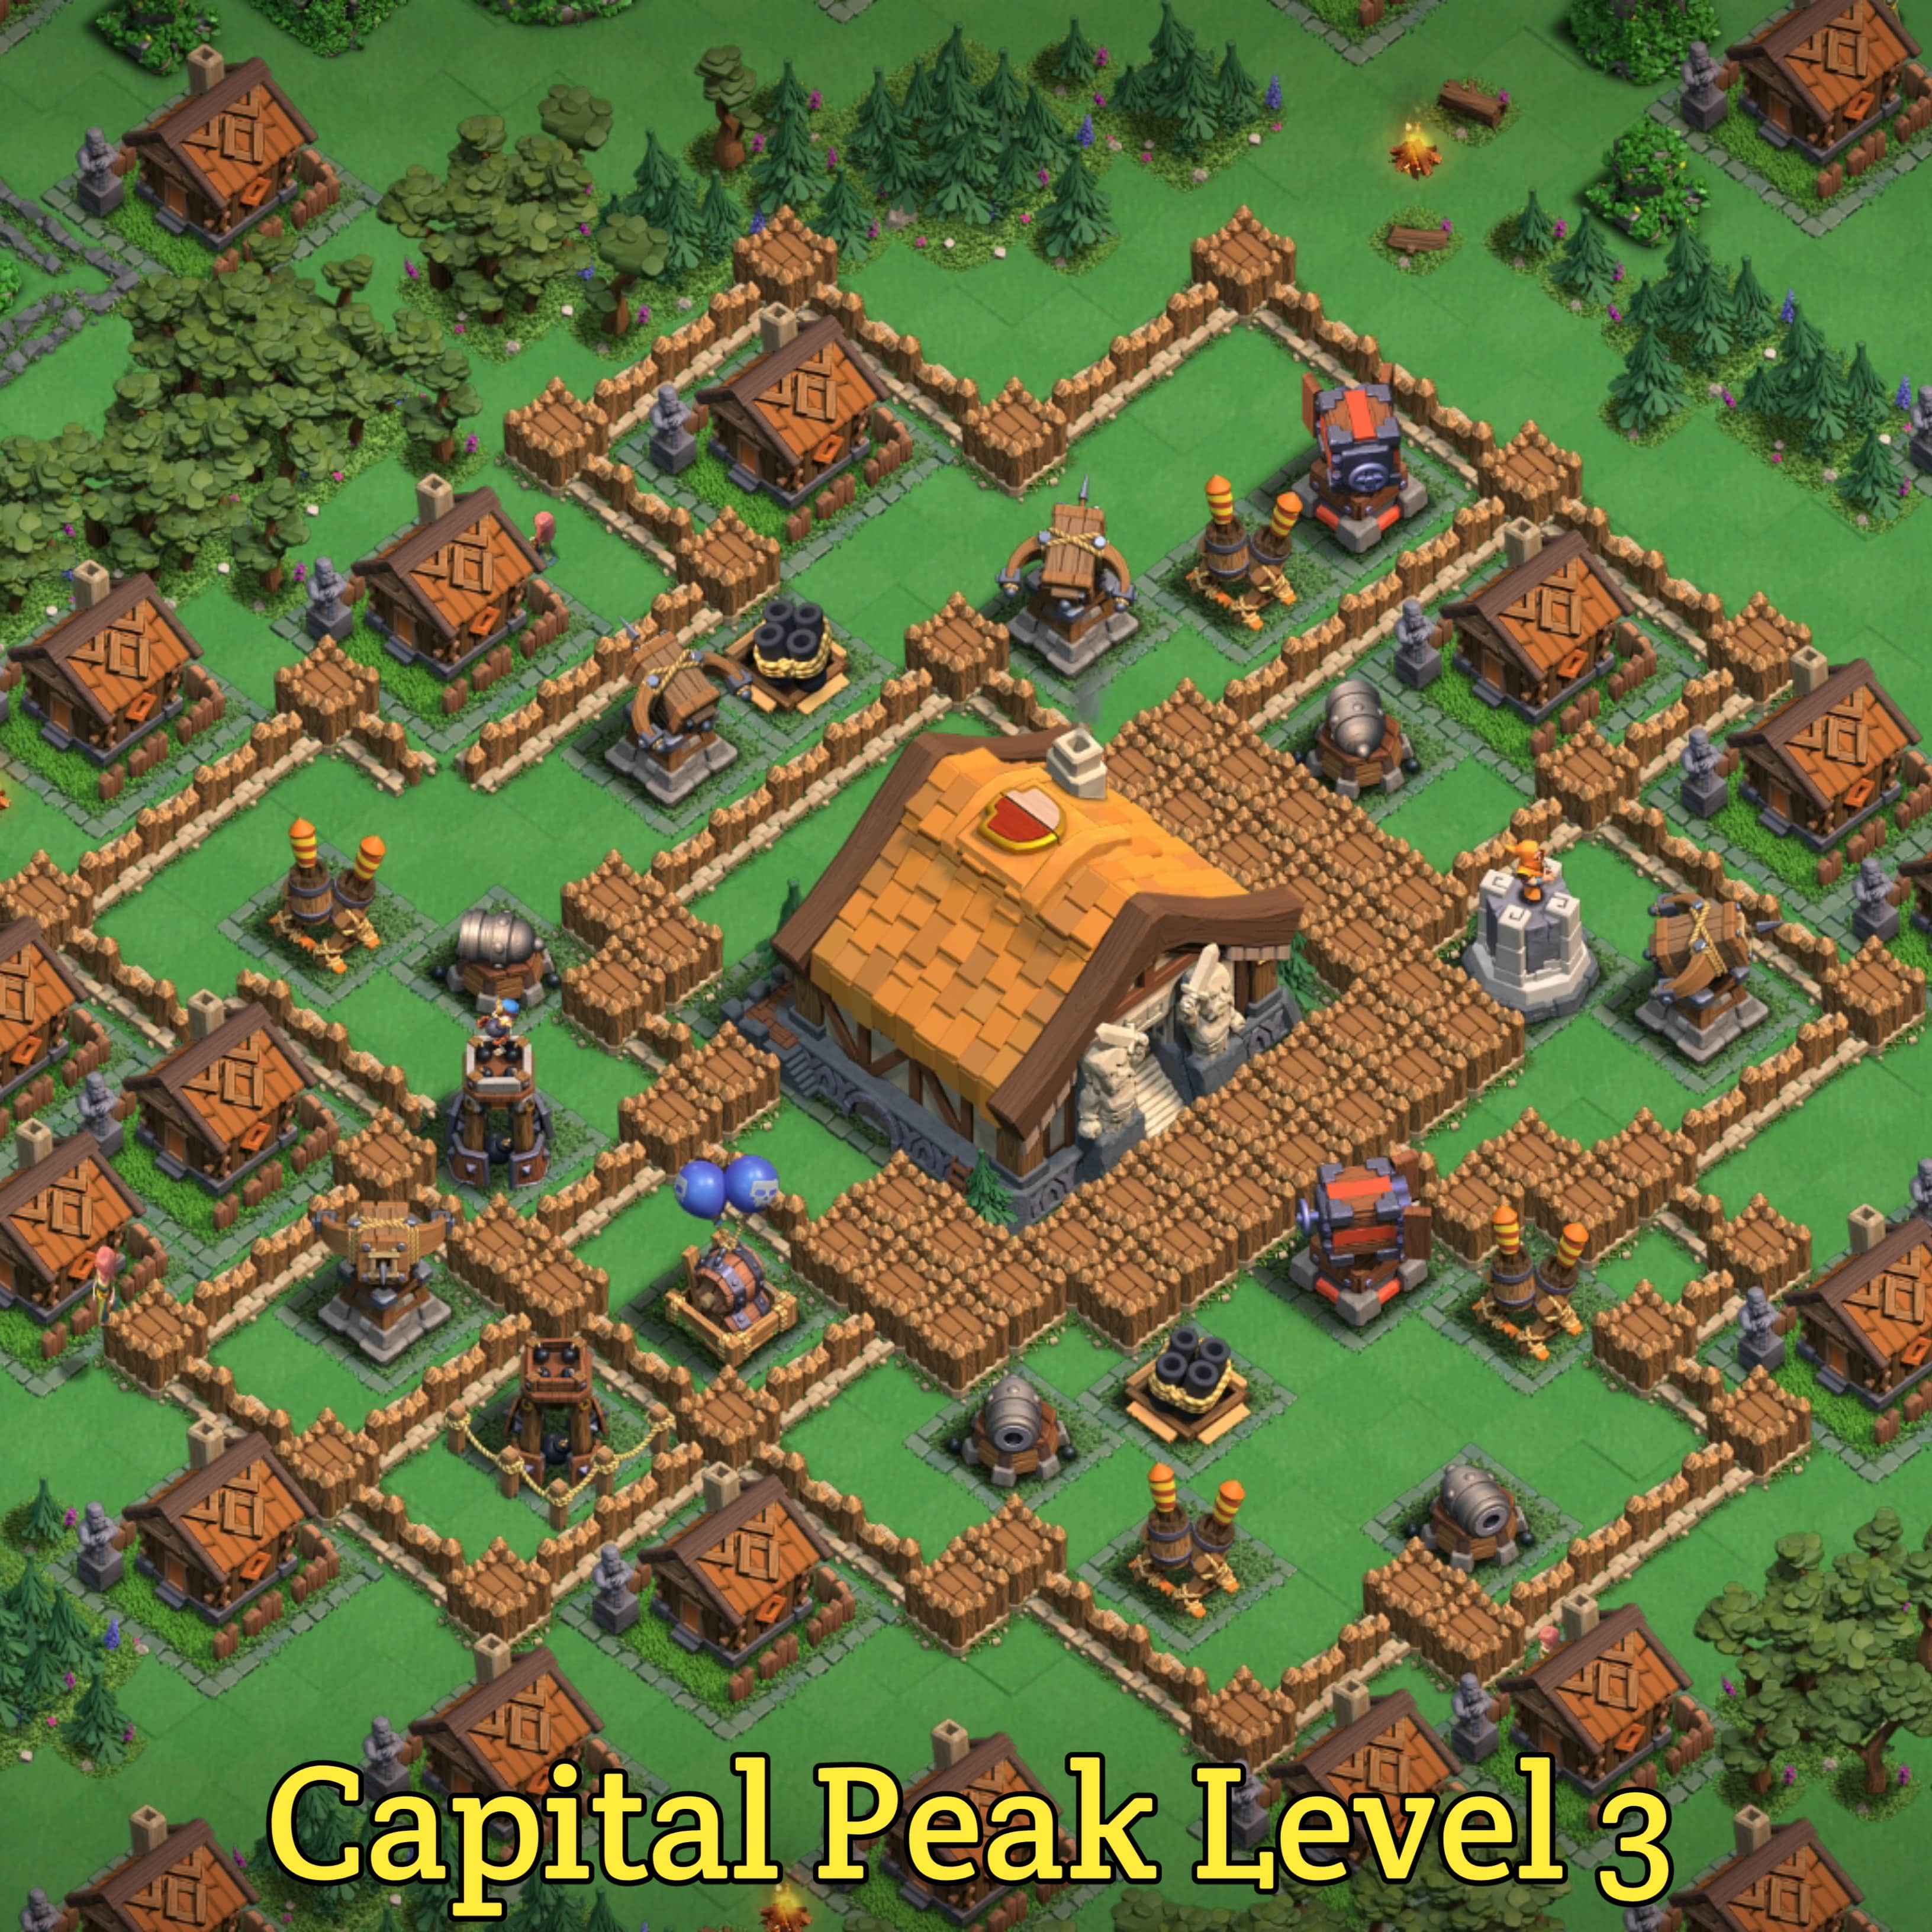 Clan capital Layout